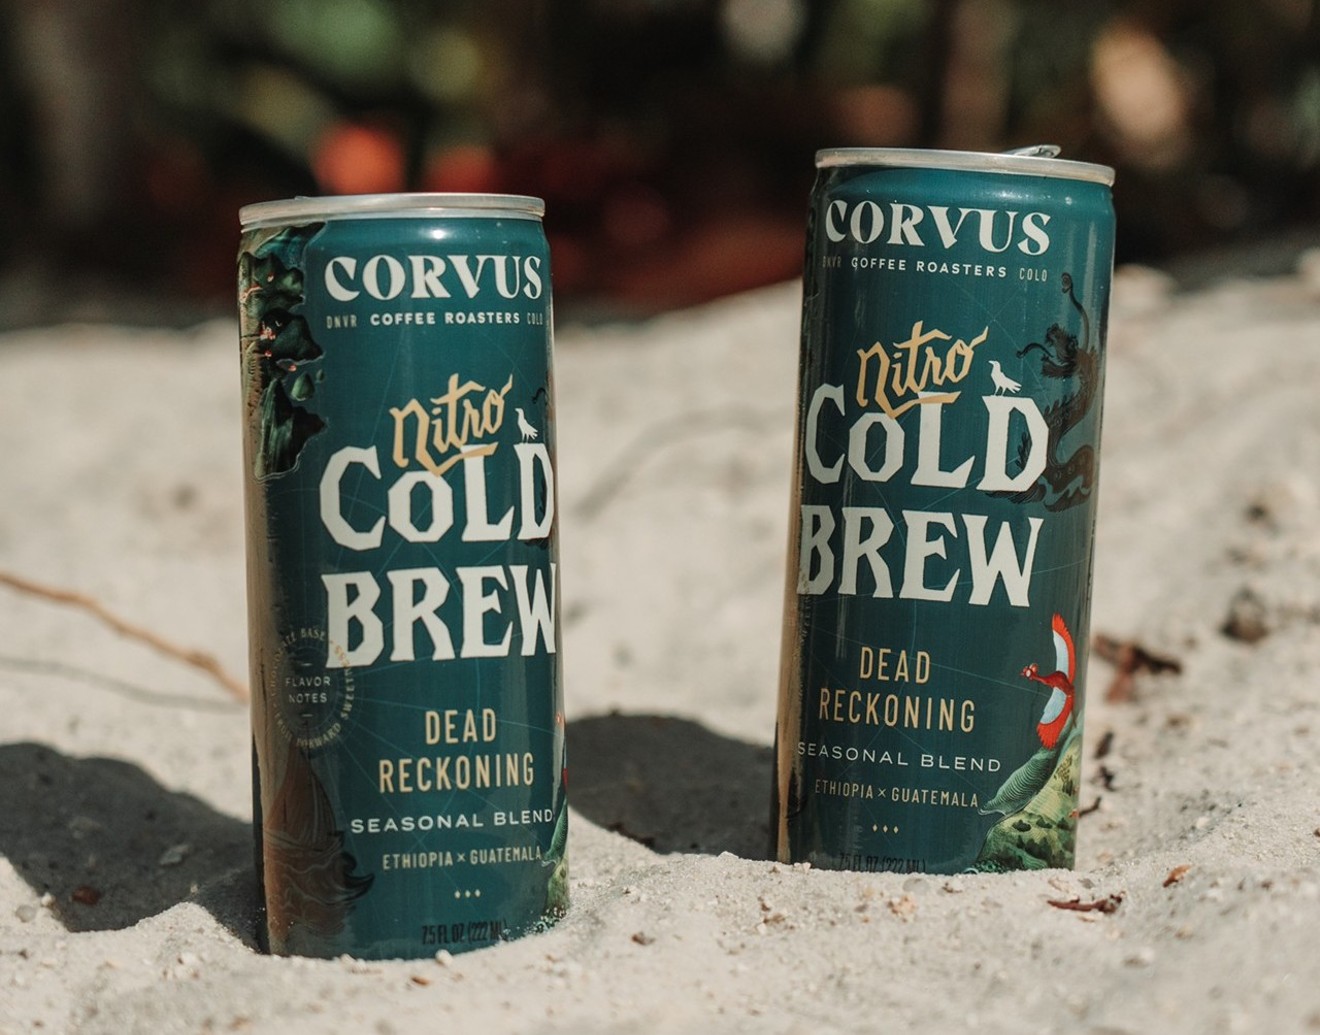 Denver-based Corvus Coffee offers a nitro cold brew in a can.